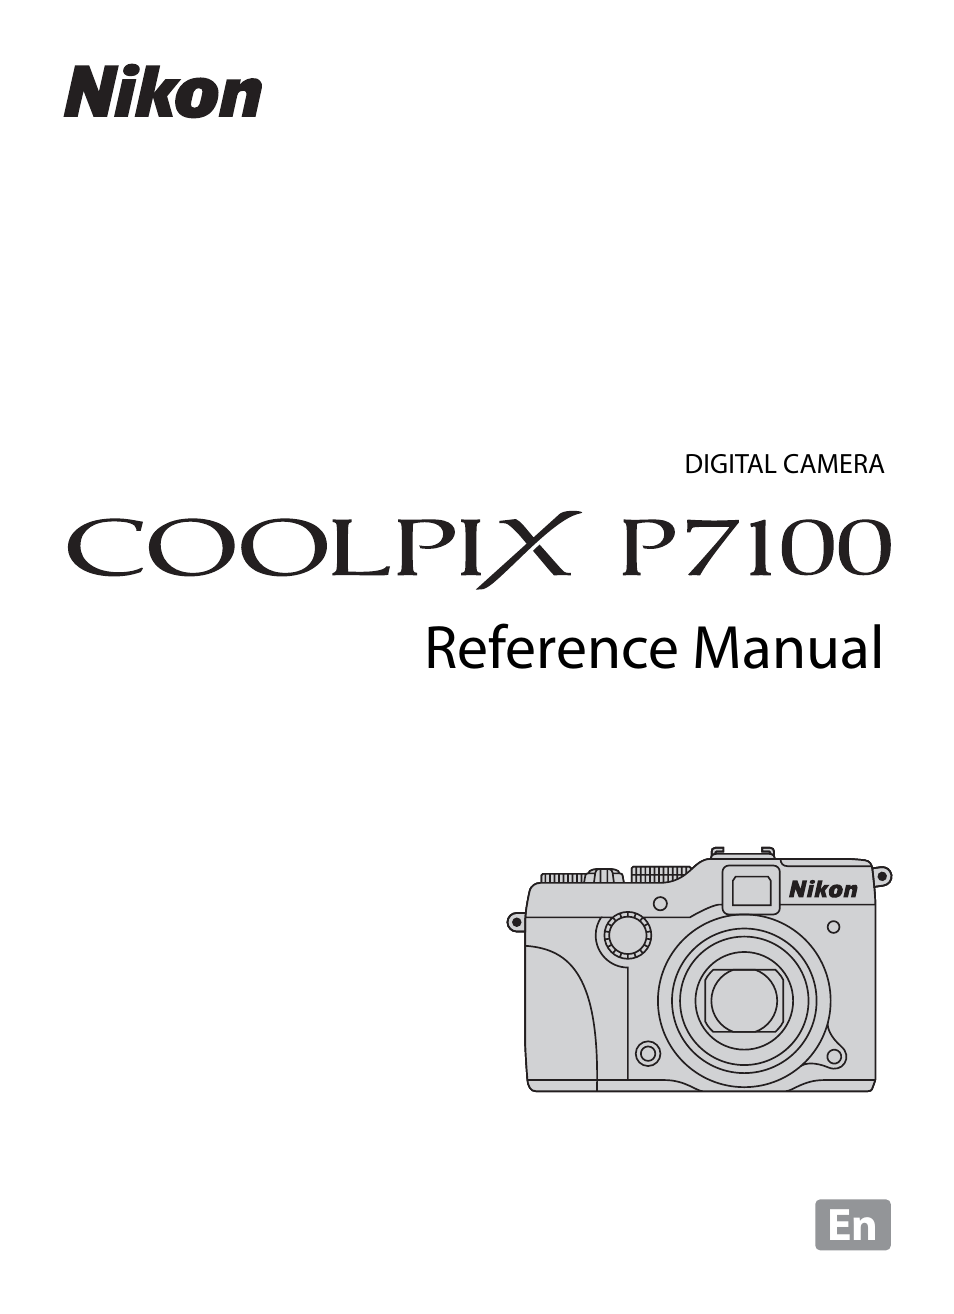 NIKON P7100 PRINTED INSTRUCTION MANUAL USER GUIDE 260 PAGES A5 